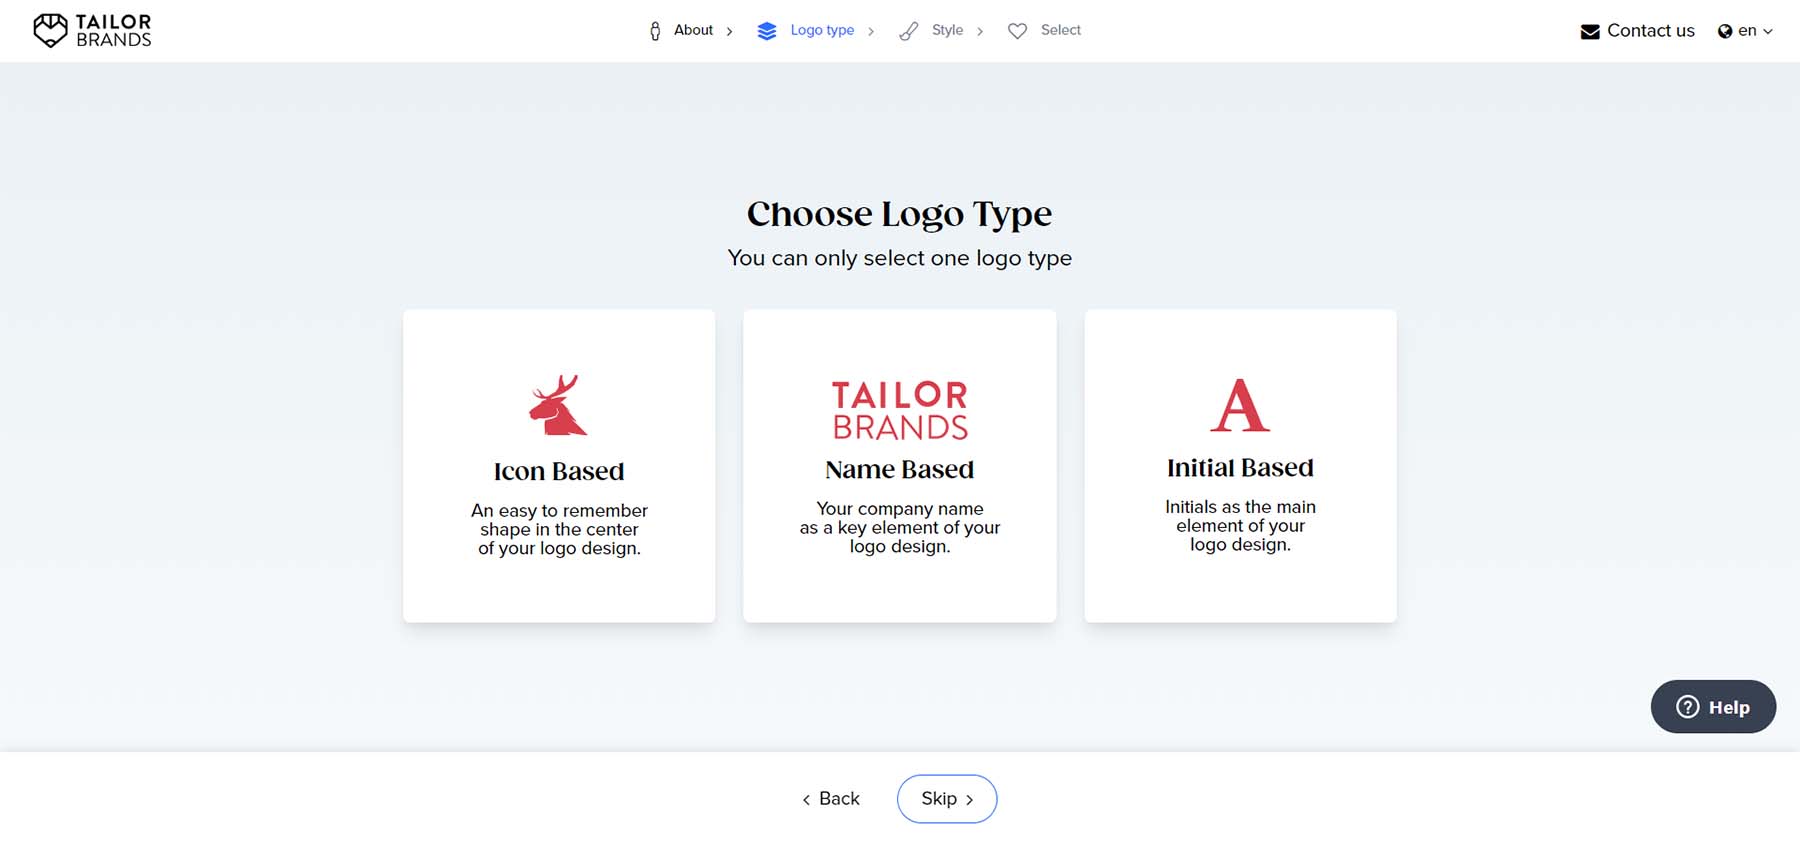 Tailor Brands logo style settings sets it apart from other generators on our list